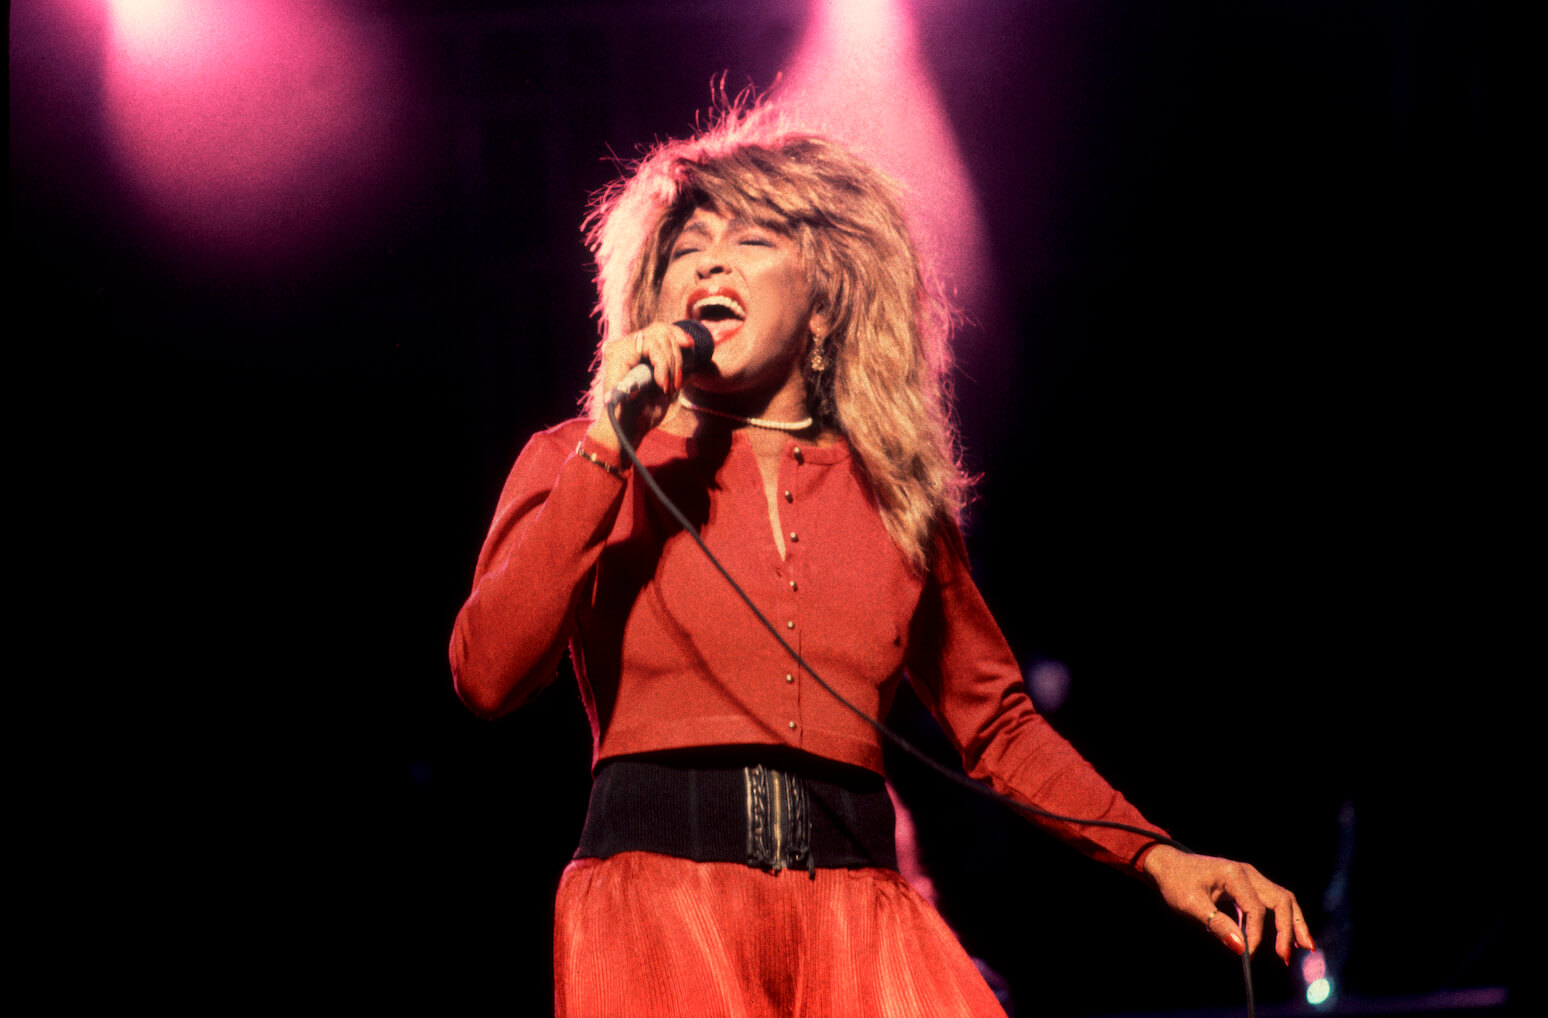 Tina Turner singing on stage in a red outfit